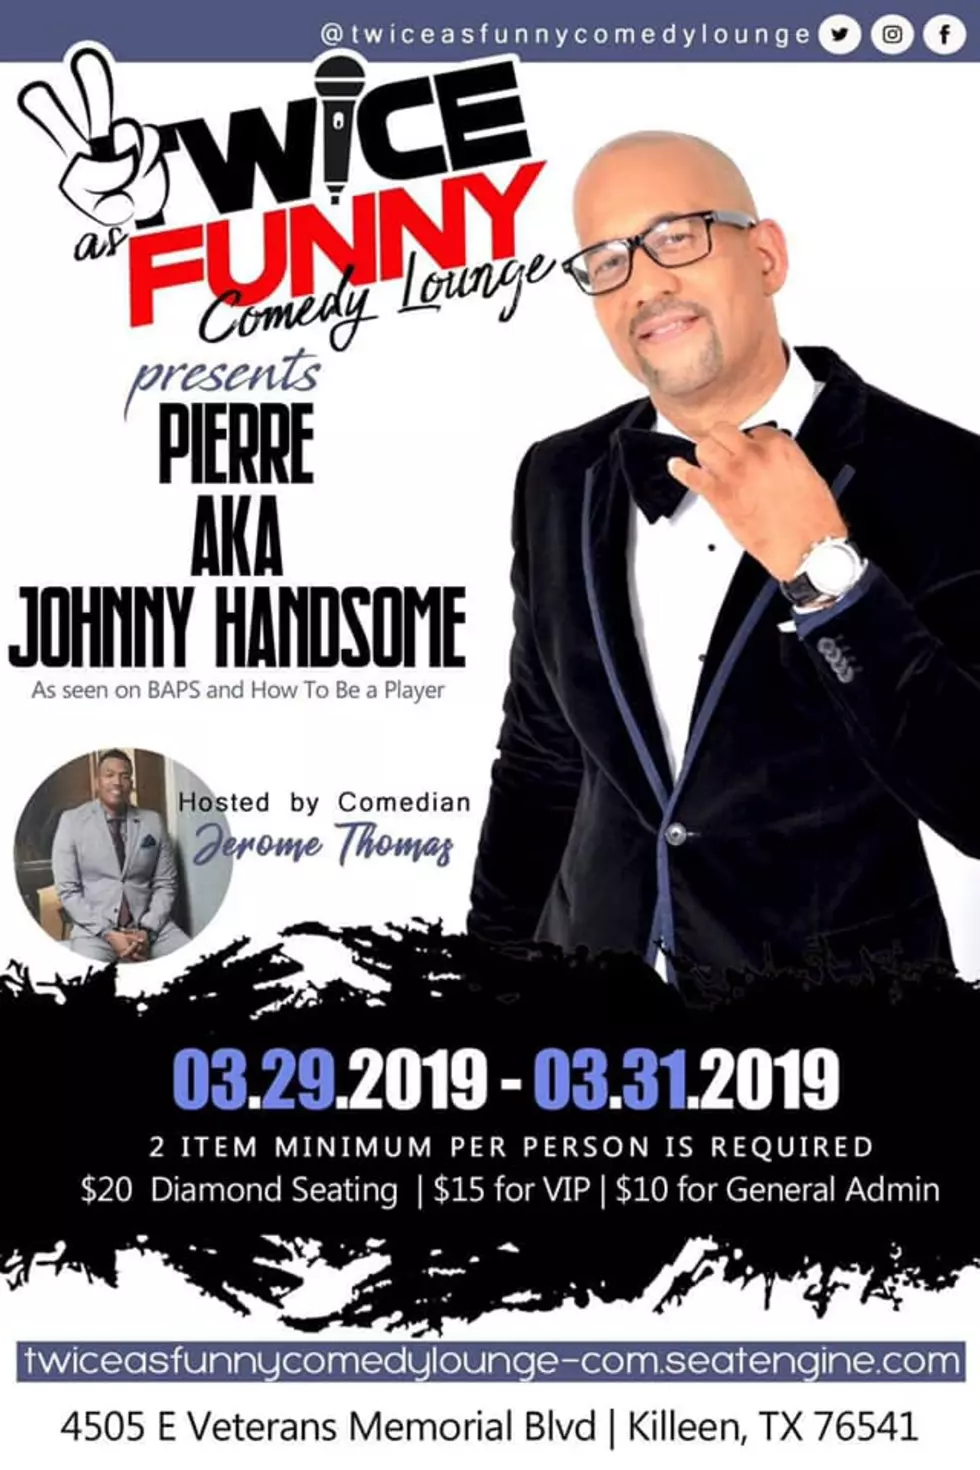 Comedian & Actor Pierre Returns To His Birthplace Killeen To Perform